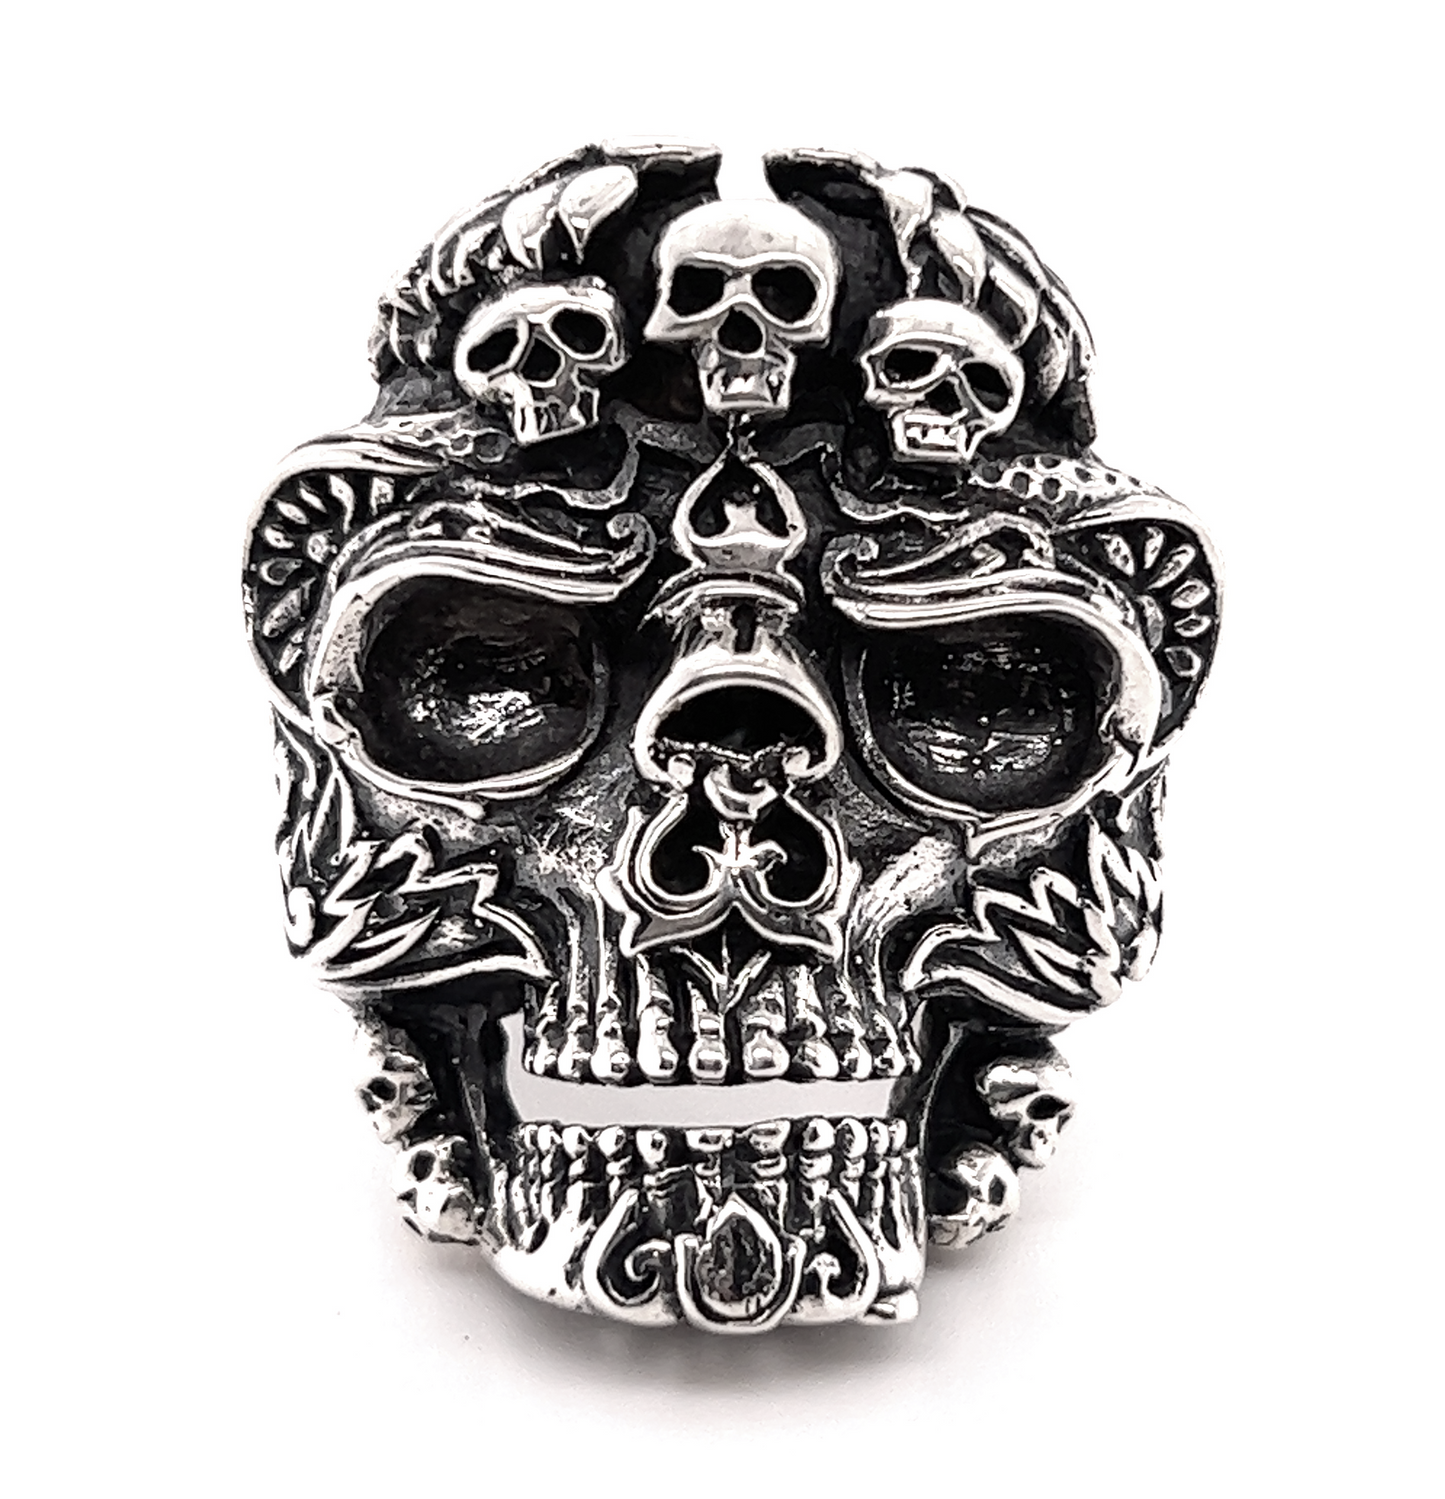 An exquisite skull ring, part of a jewelry line featuring skulls.